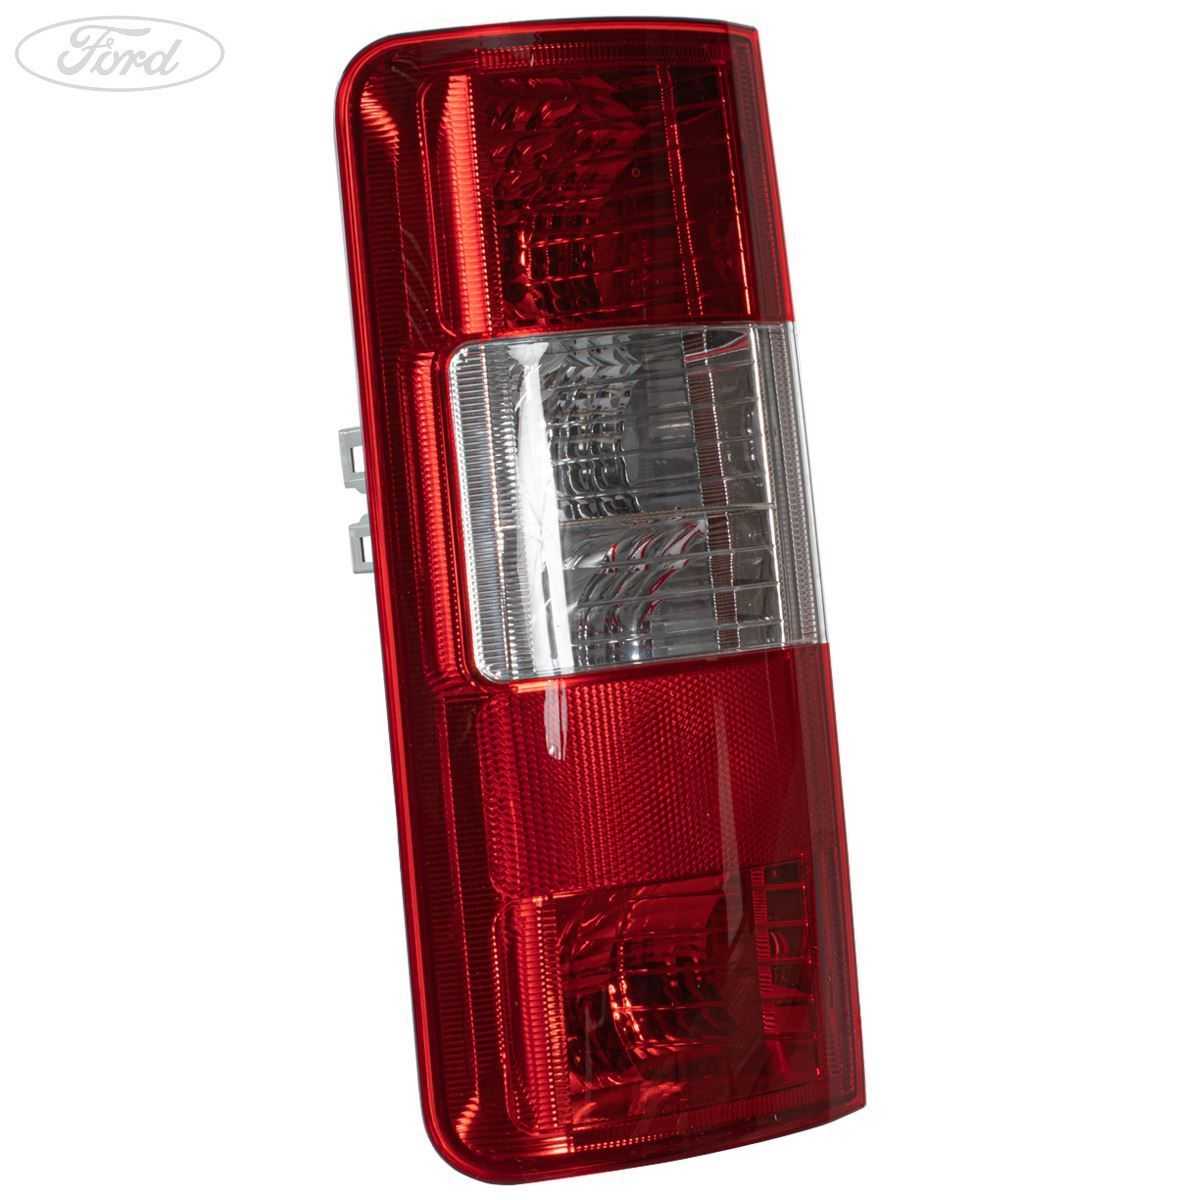 Ford, TRANSIT CONNECT REAR PASSENGER SIDE LIGHT TAIL LAMP CLUSTER 2002-2013